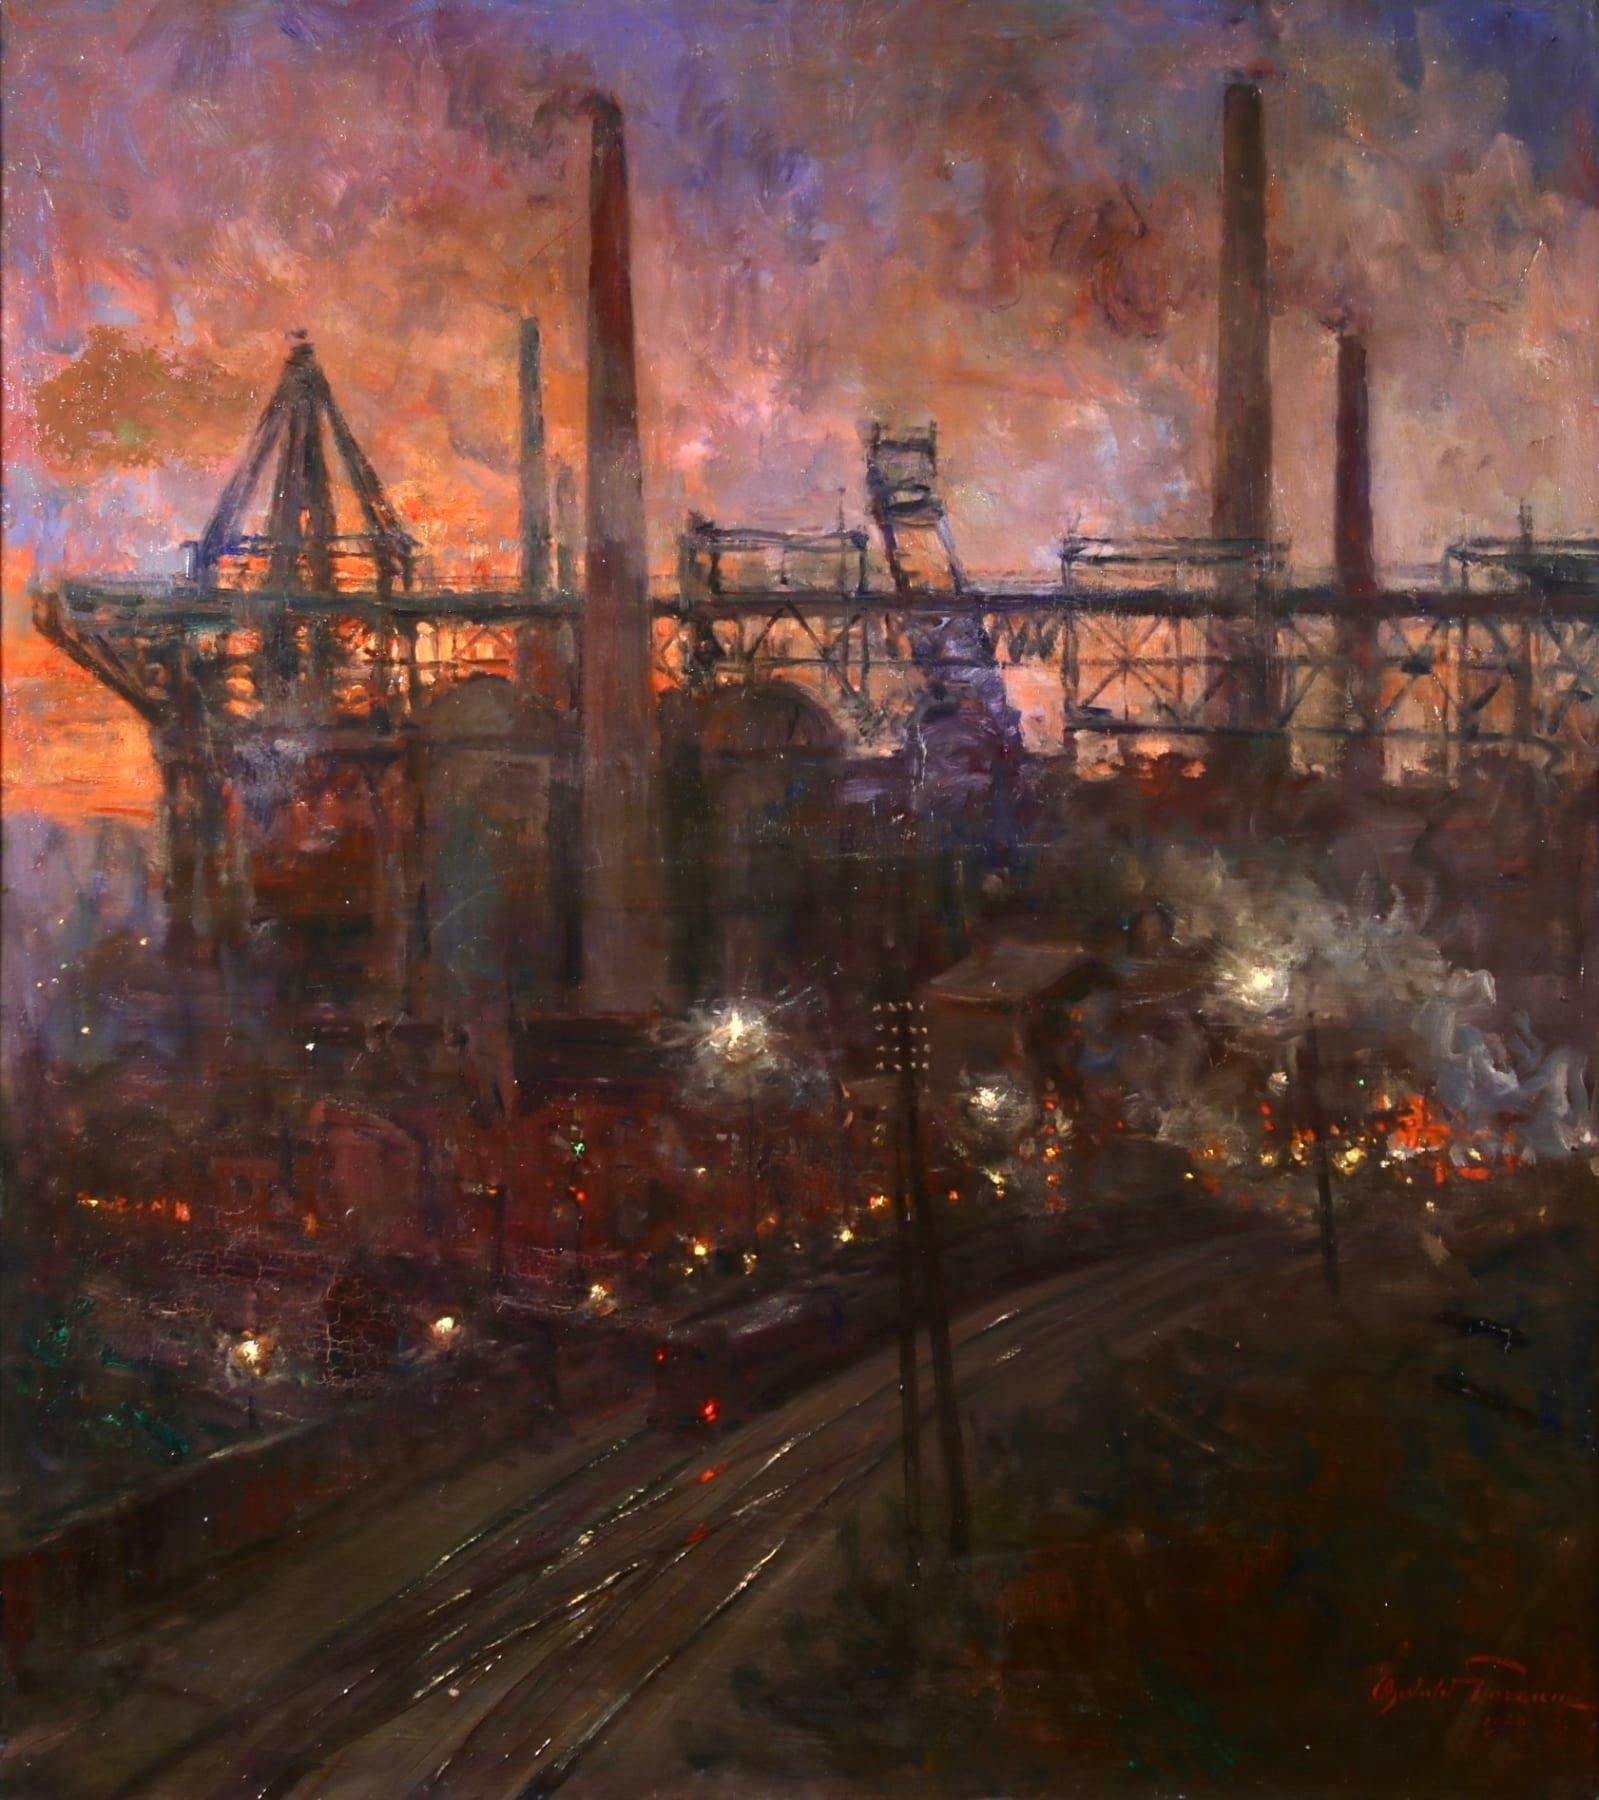 A stunning oil on canvas by Belgian Realist painter Oswald Poreau, depicting a train pulled into an industrial works at night. Smoke bellows from the chimney stacks and the dark blue night sky is alight with the orange glow of the